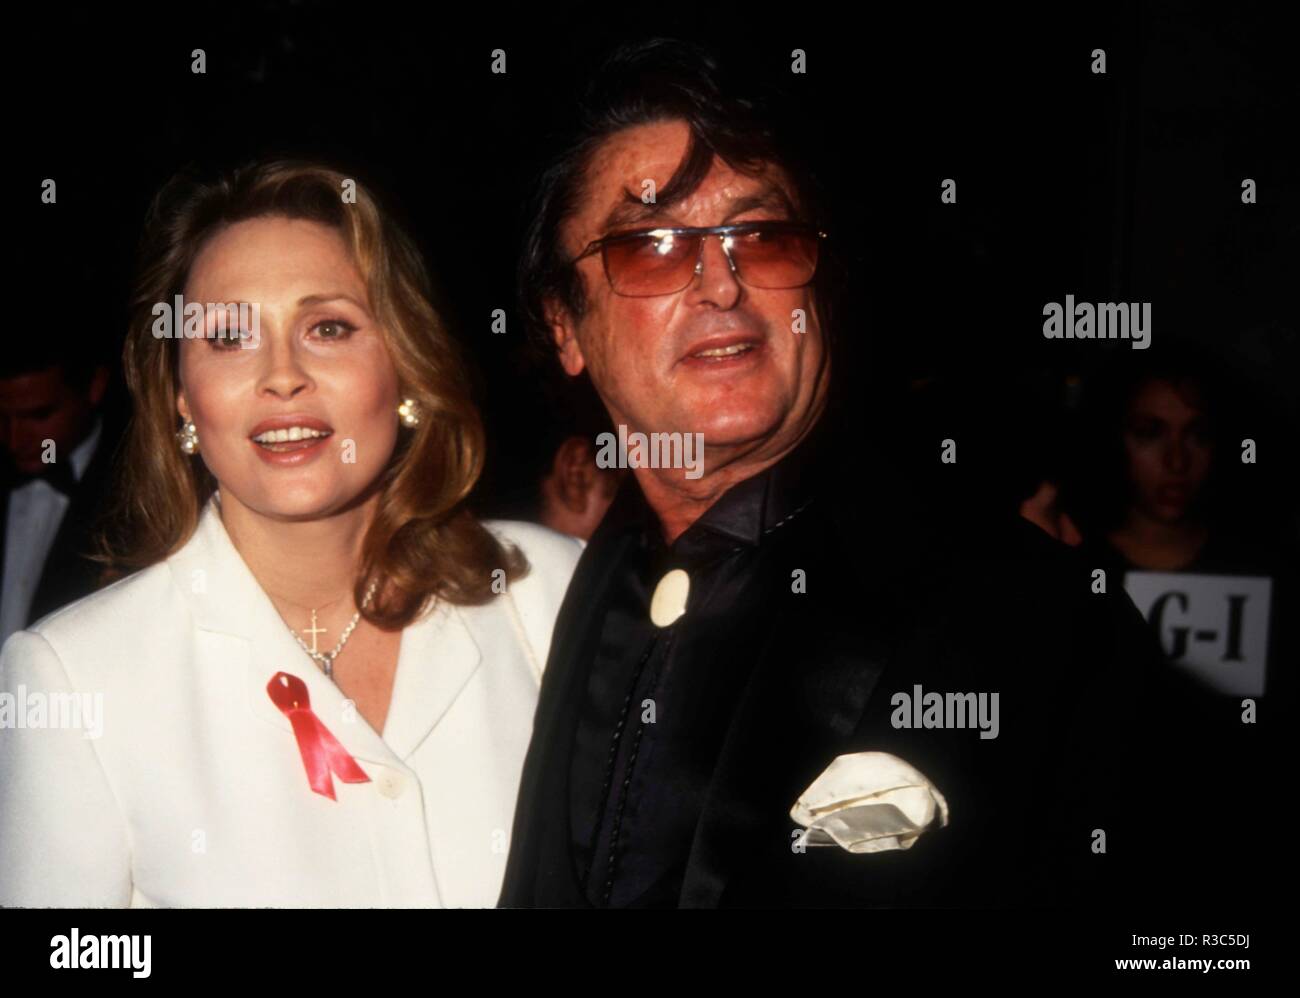 BEVERLY HILLS, CA - JANUARY 29: Actress Faye Dunaway and director Robert Evans attend The Daily Variety Salutes Army Archerd on January 29, 1993 at the Beverly Hilton Hotel in Beverly Hills, California. Photo by Barry King/Alamy Stock Photo Stock Photo